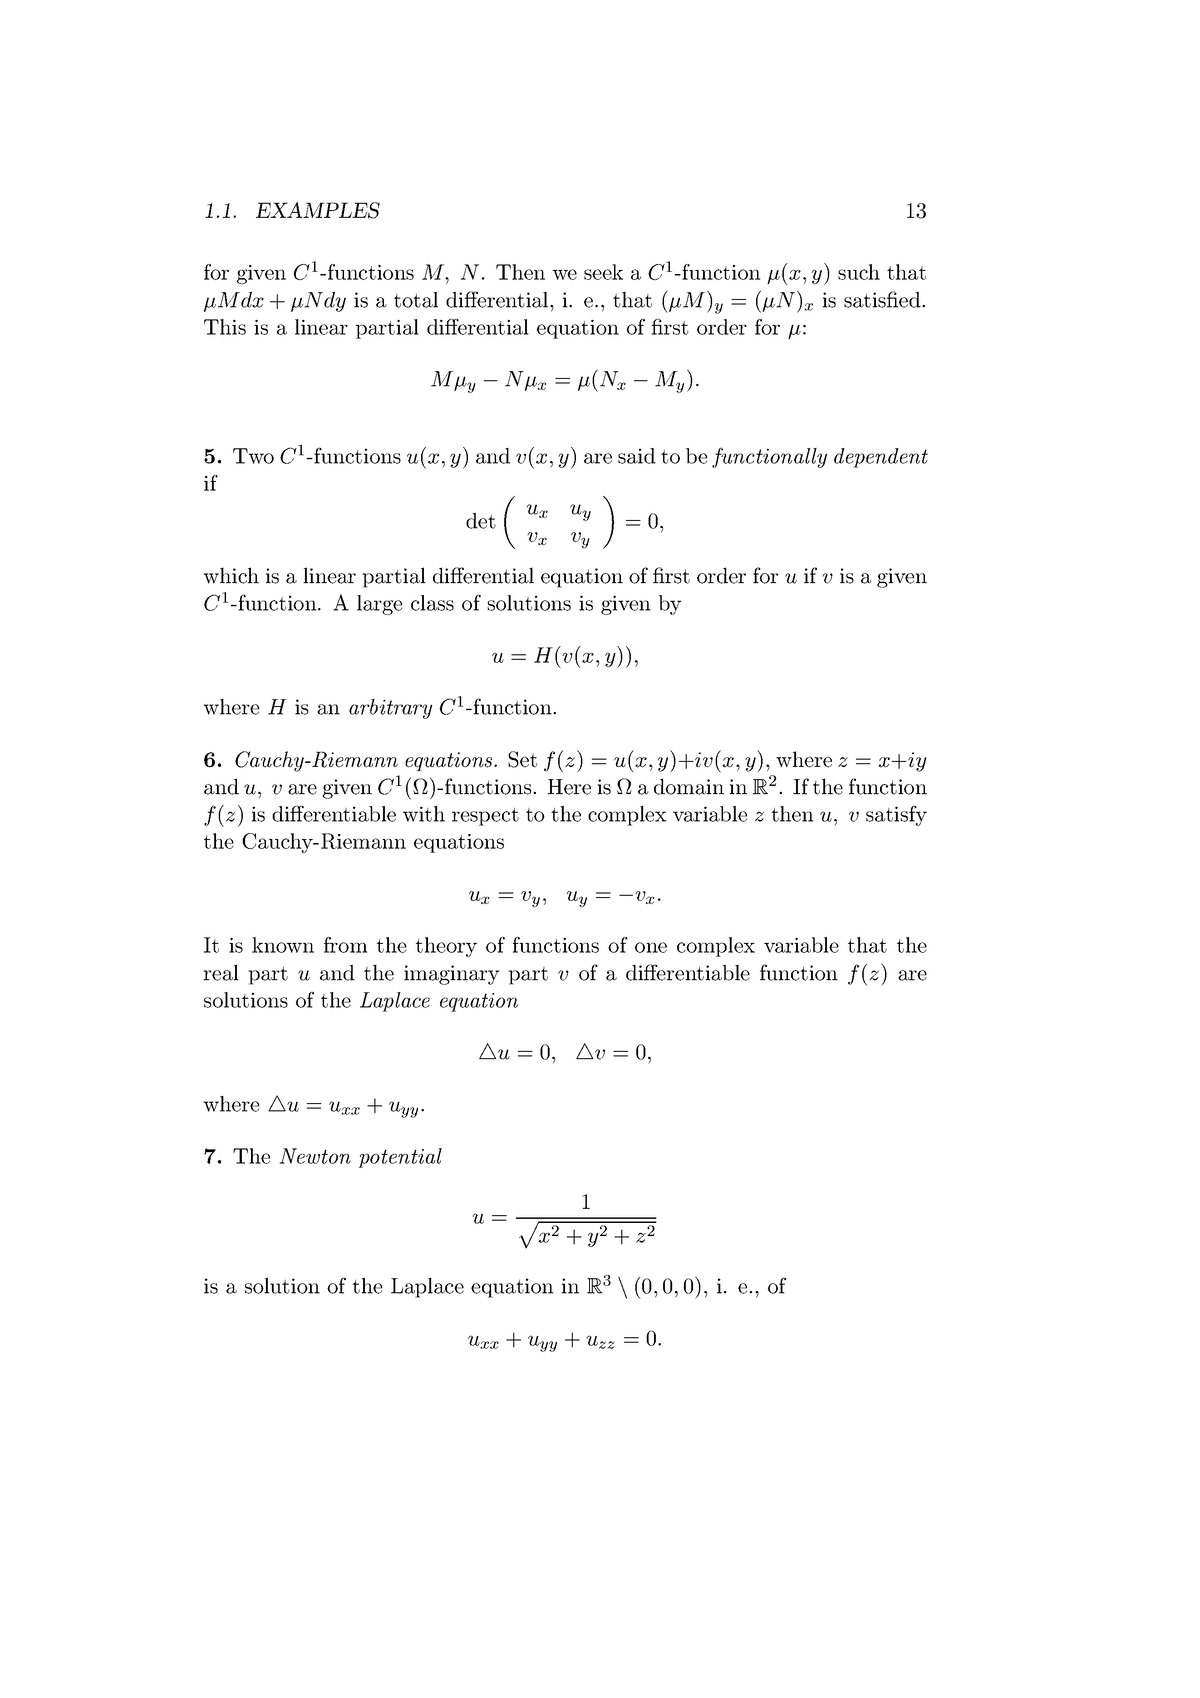 Fisika matematika-5 - Equations from variational problems - 1. EXAMPLES ...